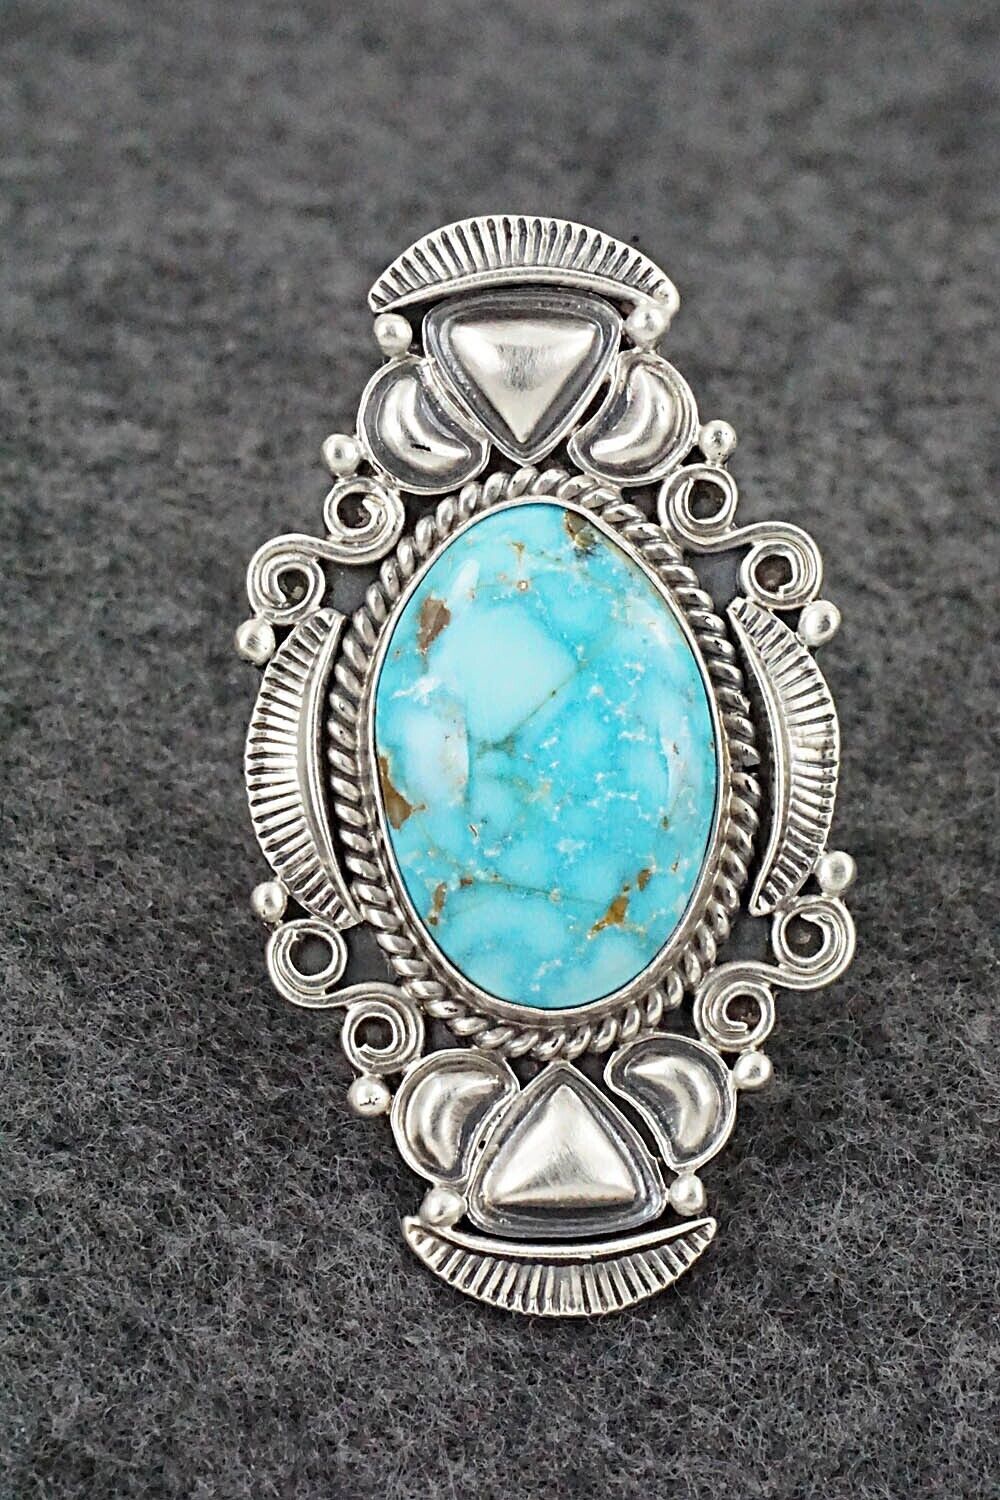 Turquoise & Sterling Silver Ring - Derrick Gordon - Size 9